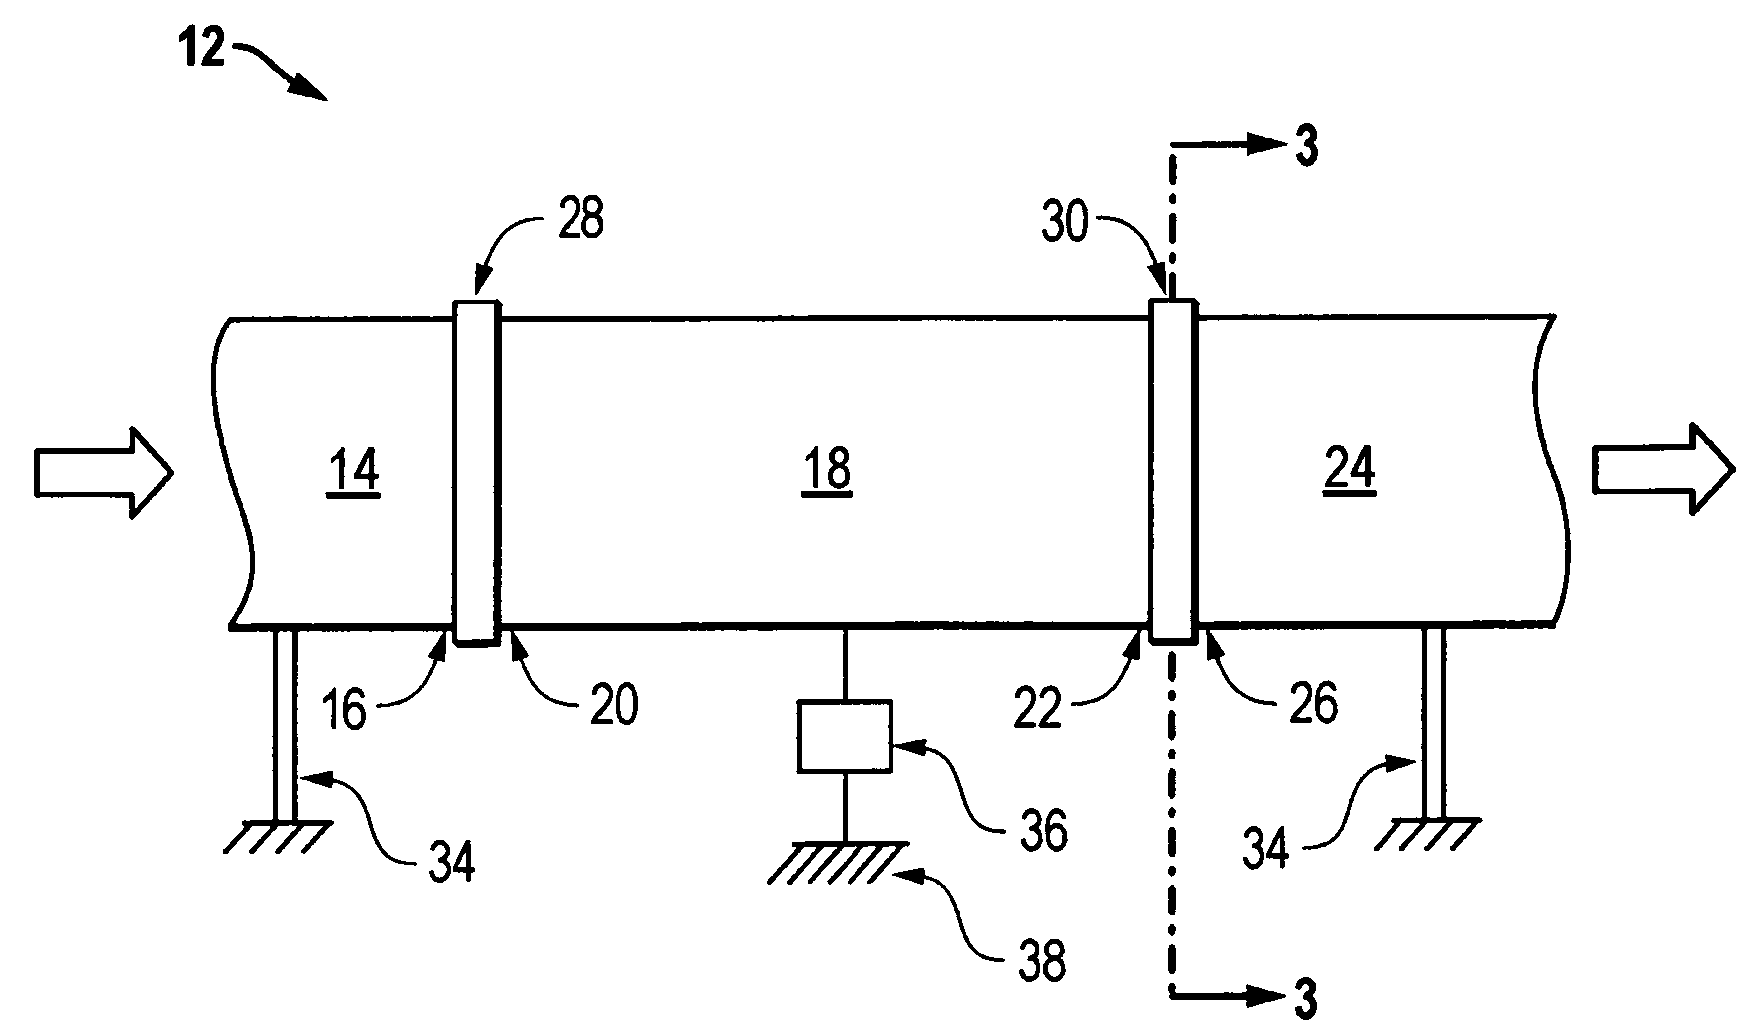 Density measuring apparatus containing a densimeter and a method of using the same in a pipeline